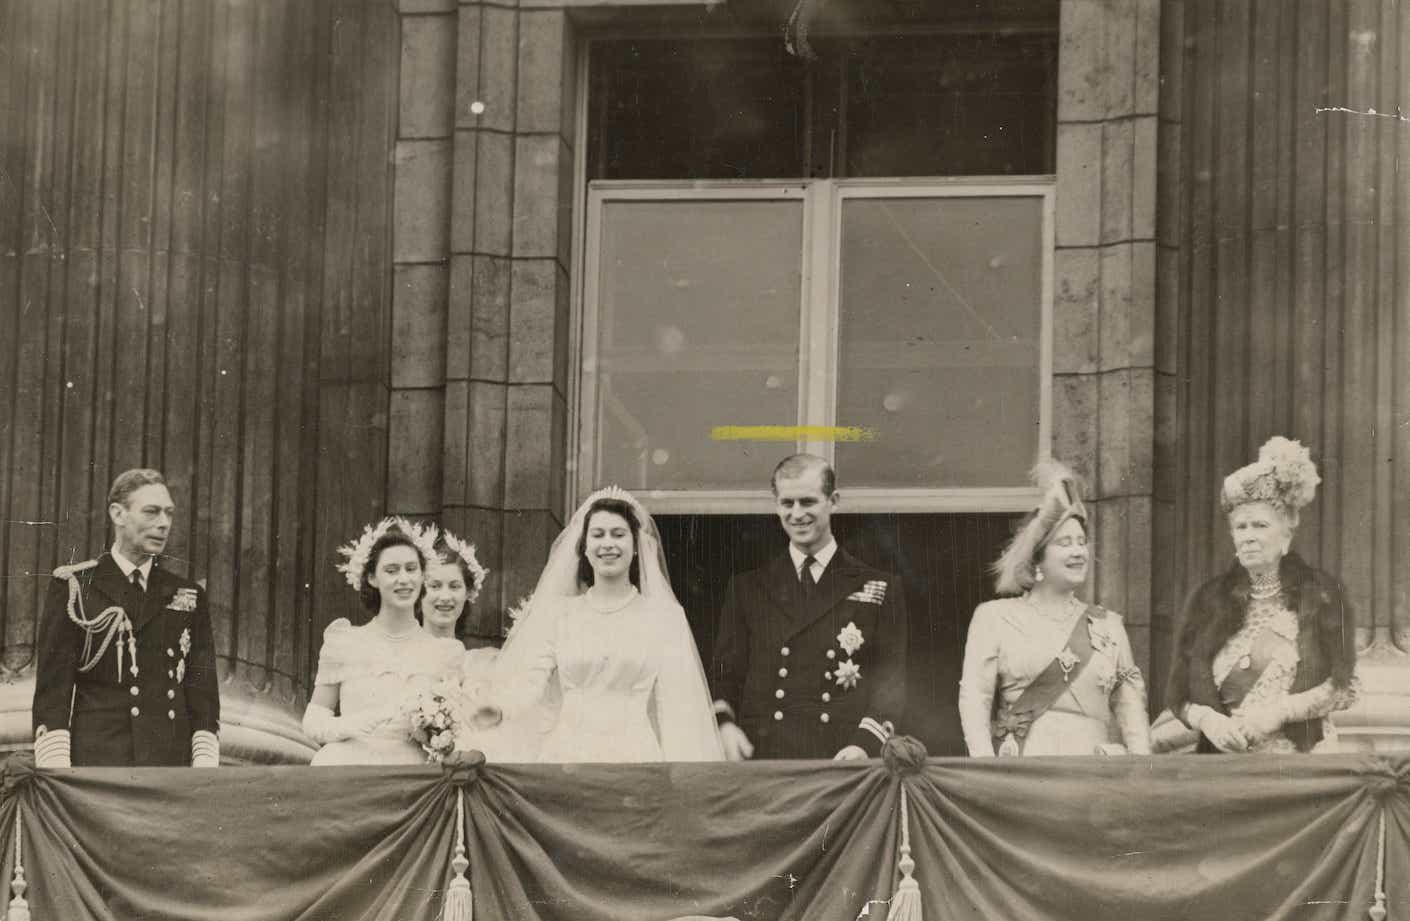 Members of the British royal family on the balcony at Buckingham Palace after the wedding of Princess Elizabeth and Philip Mountbatten in 1947.